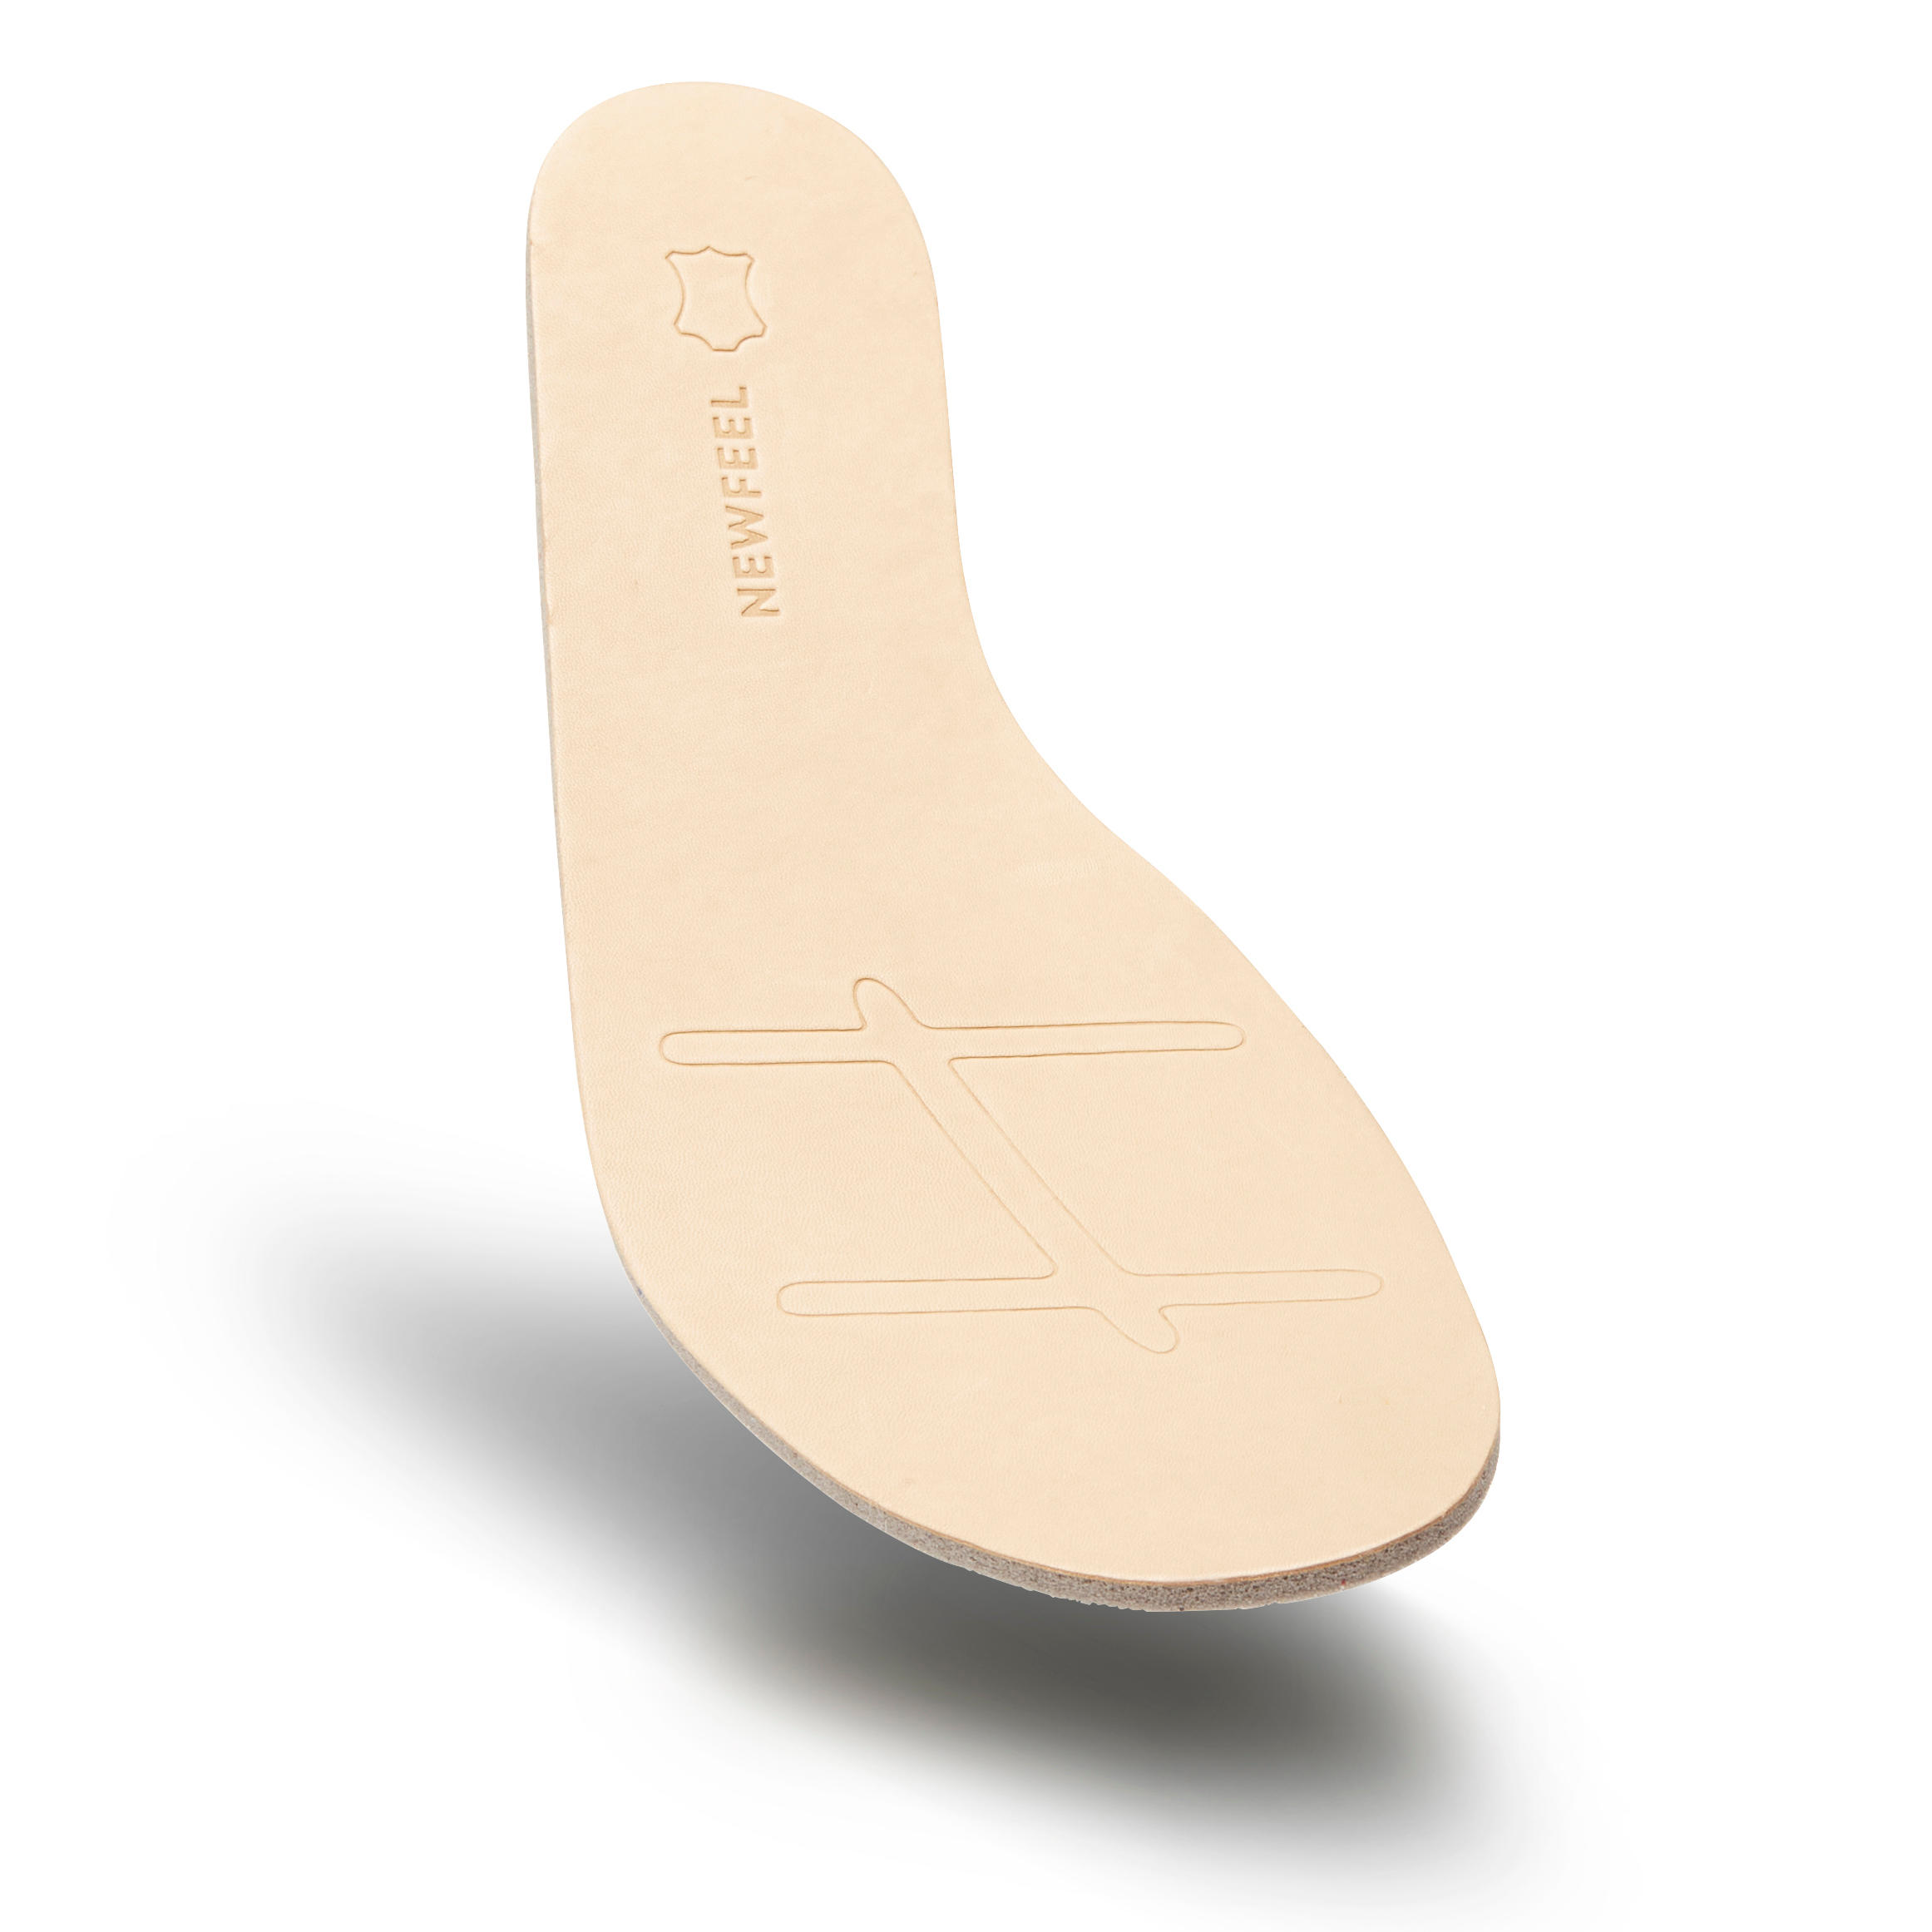 Insole W150 Leather 4/6